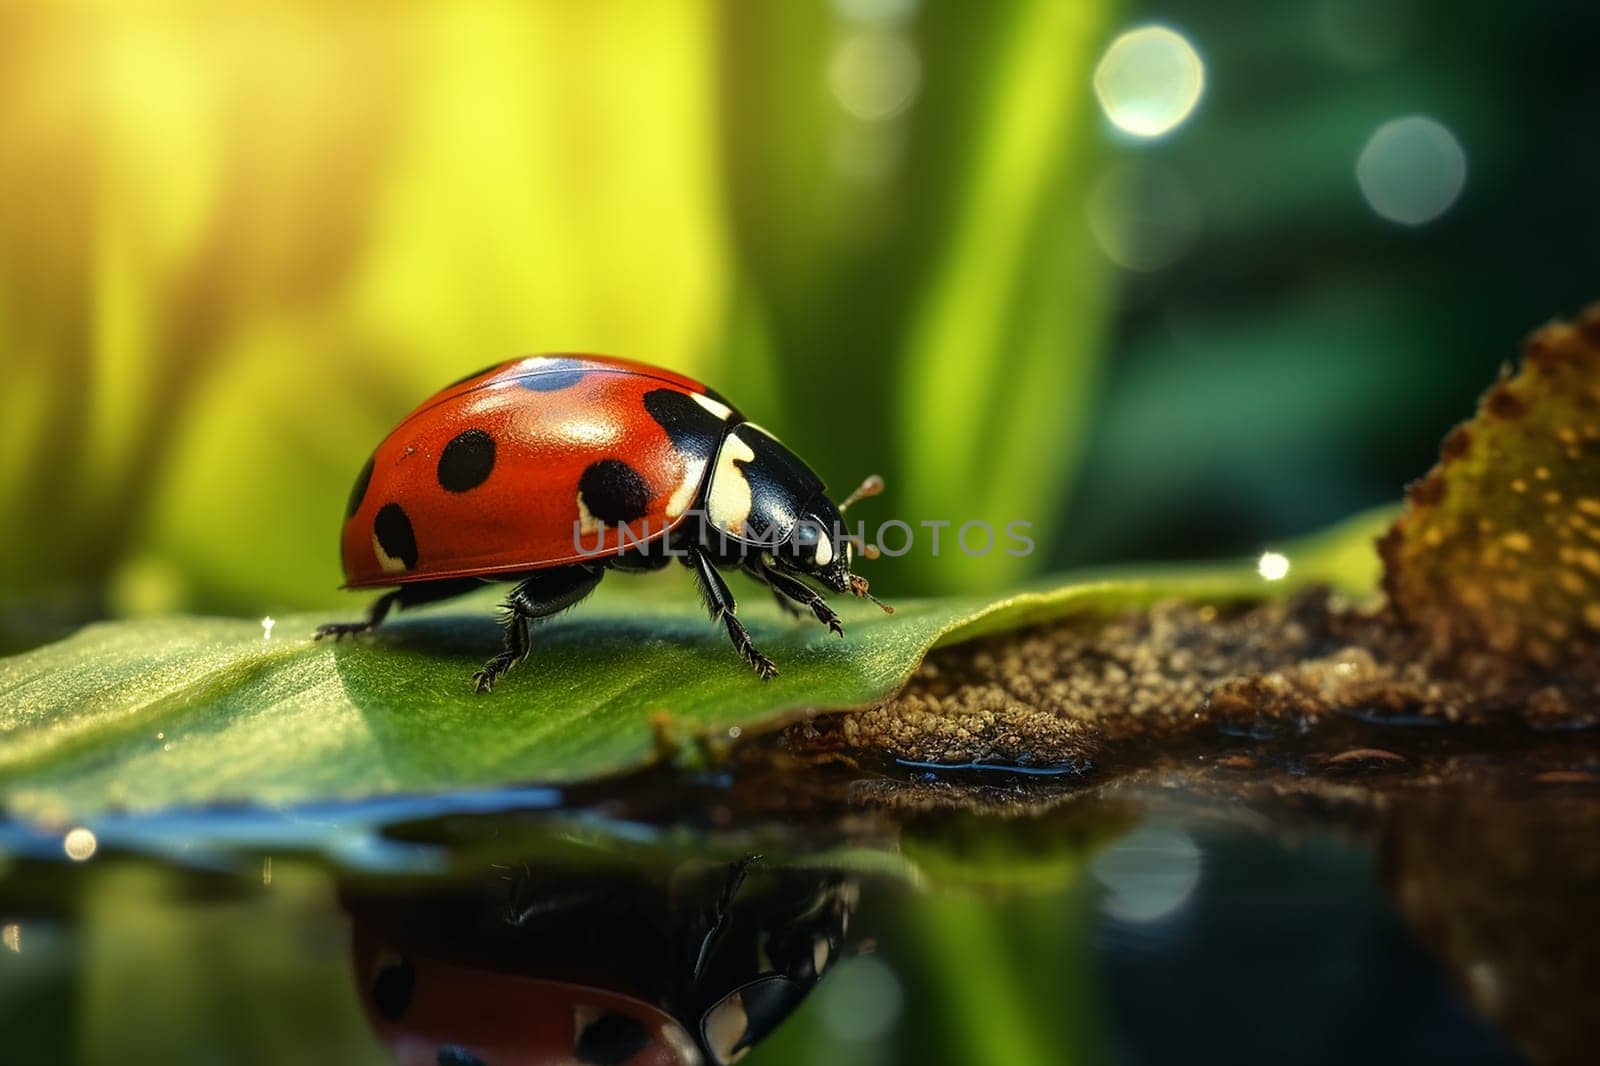 A close-up of a ladybug crawling on a leaf with a reflection in the water below. The background is blurred with bokeh.